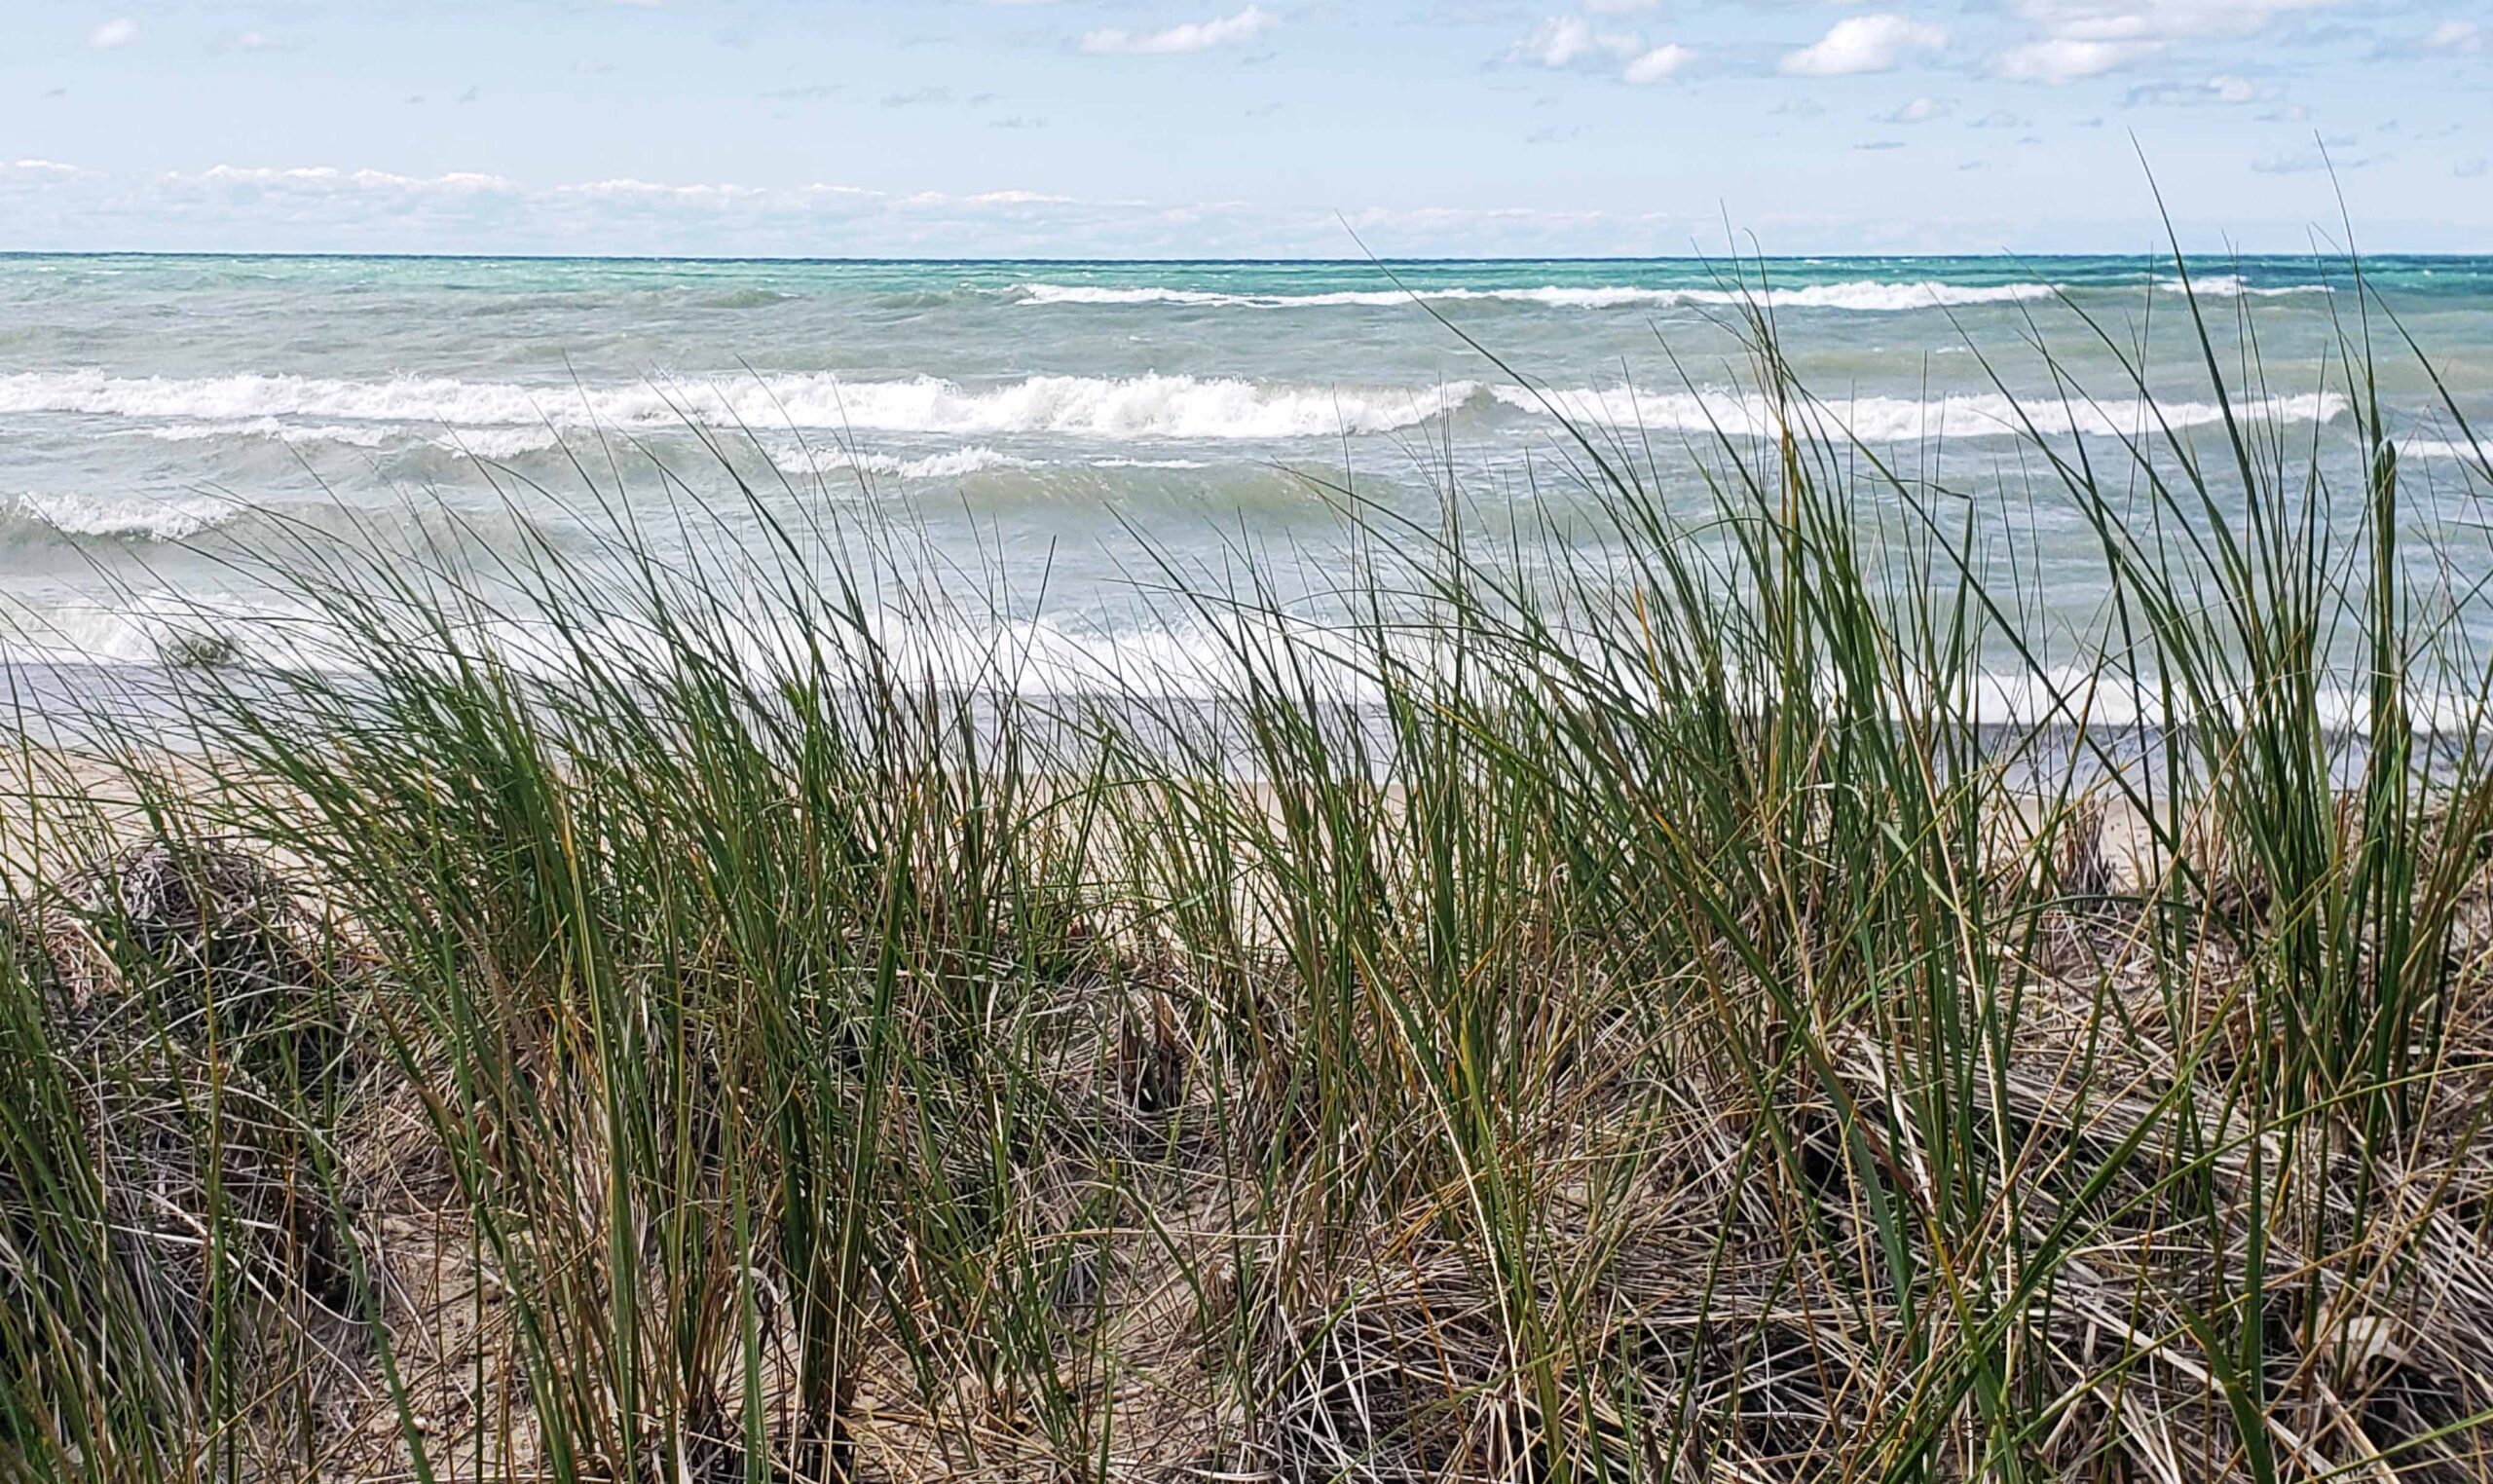 Dune grass with waves behind it